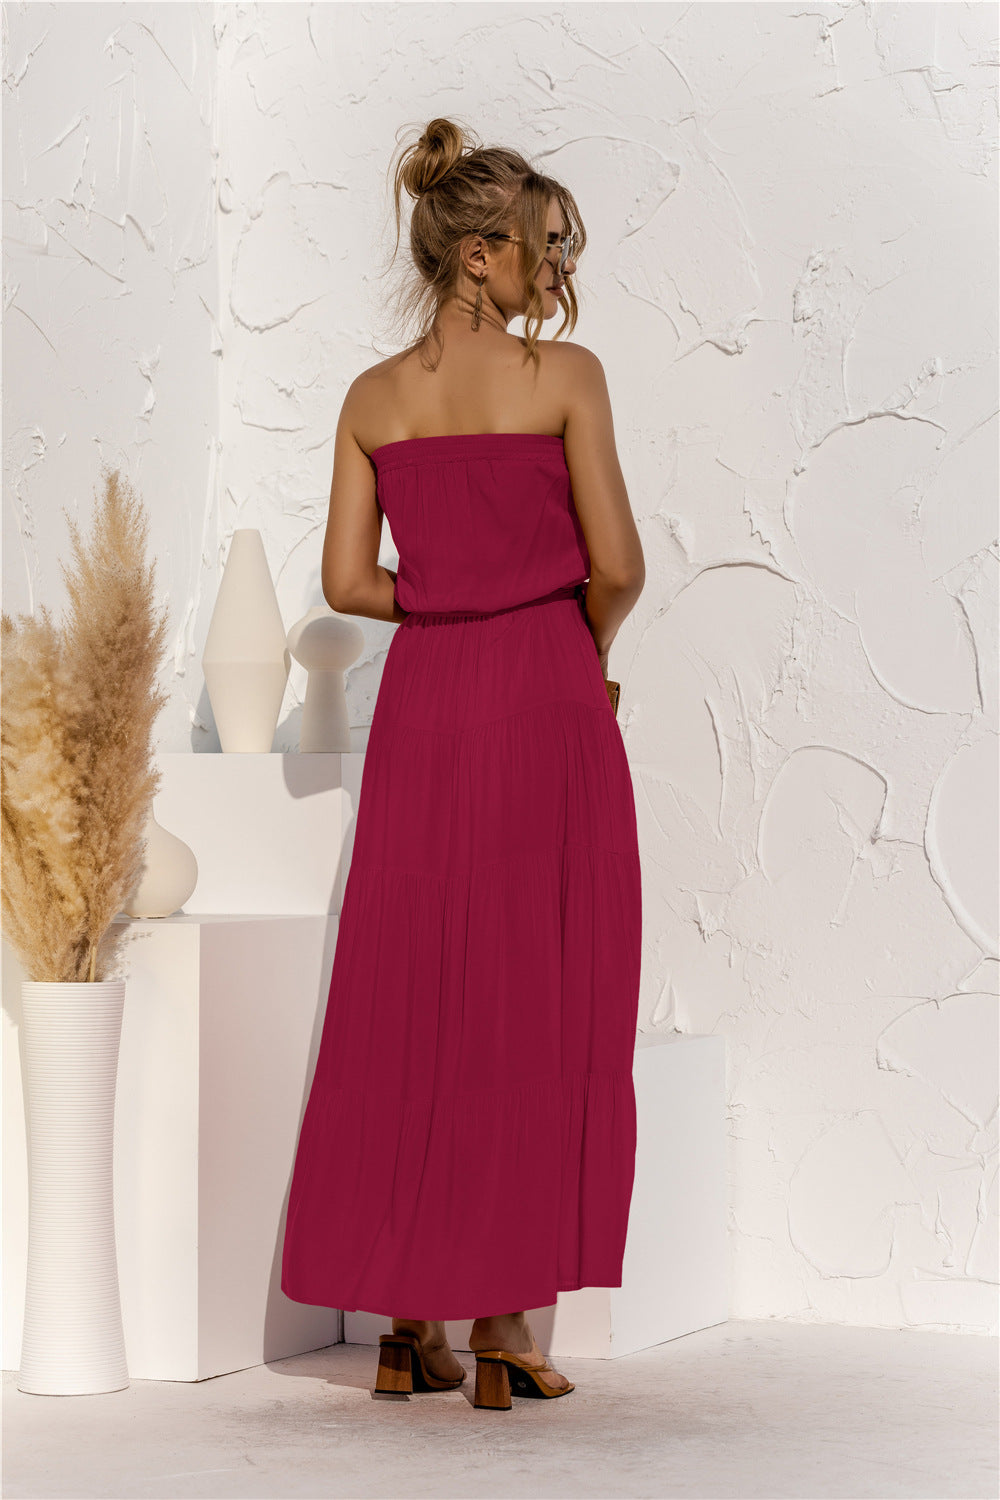 Don’t Mind Me Strapless Maxi Dress - red strapless maxi dress with top overlay, and tie waist. #Firefly Lane Boutique1